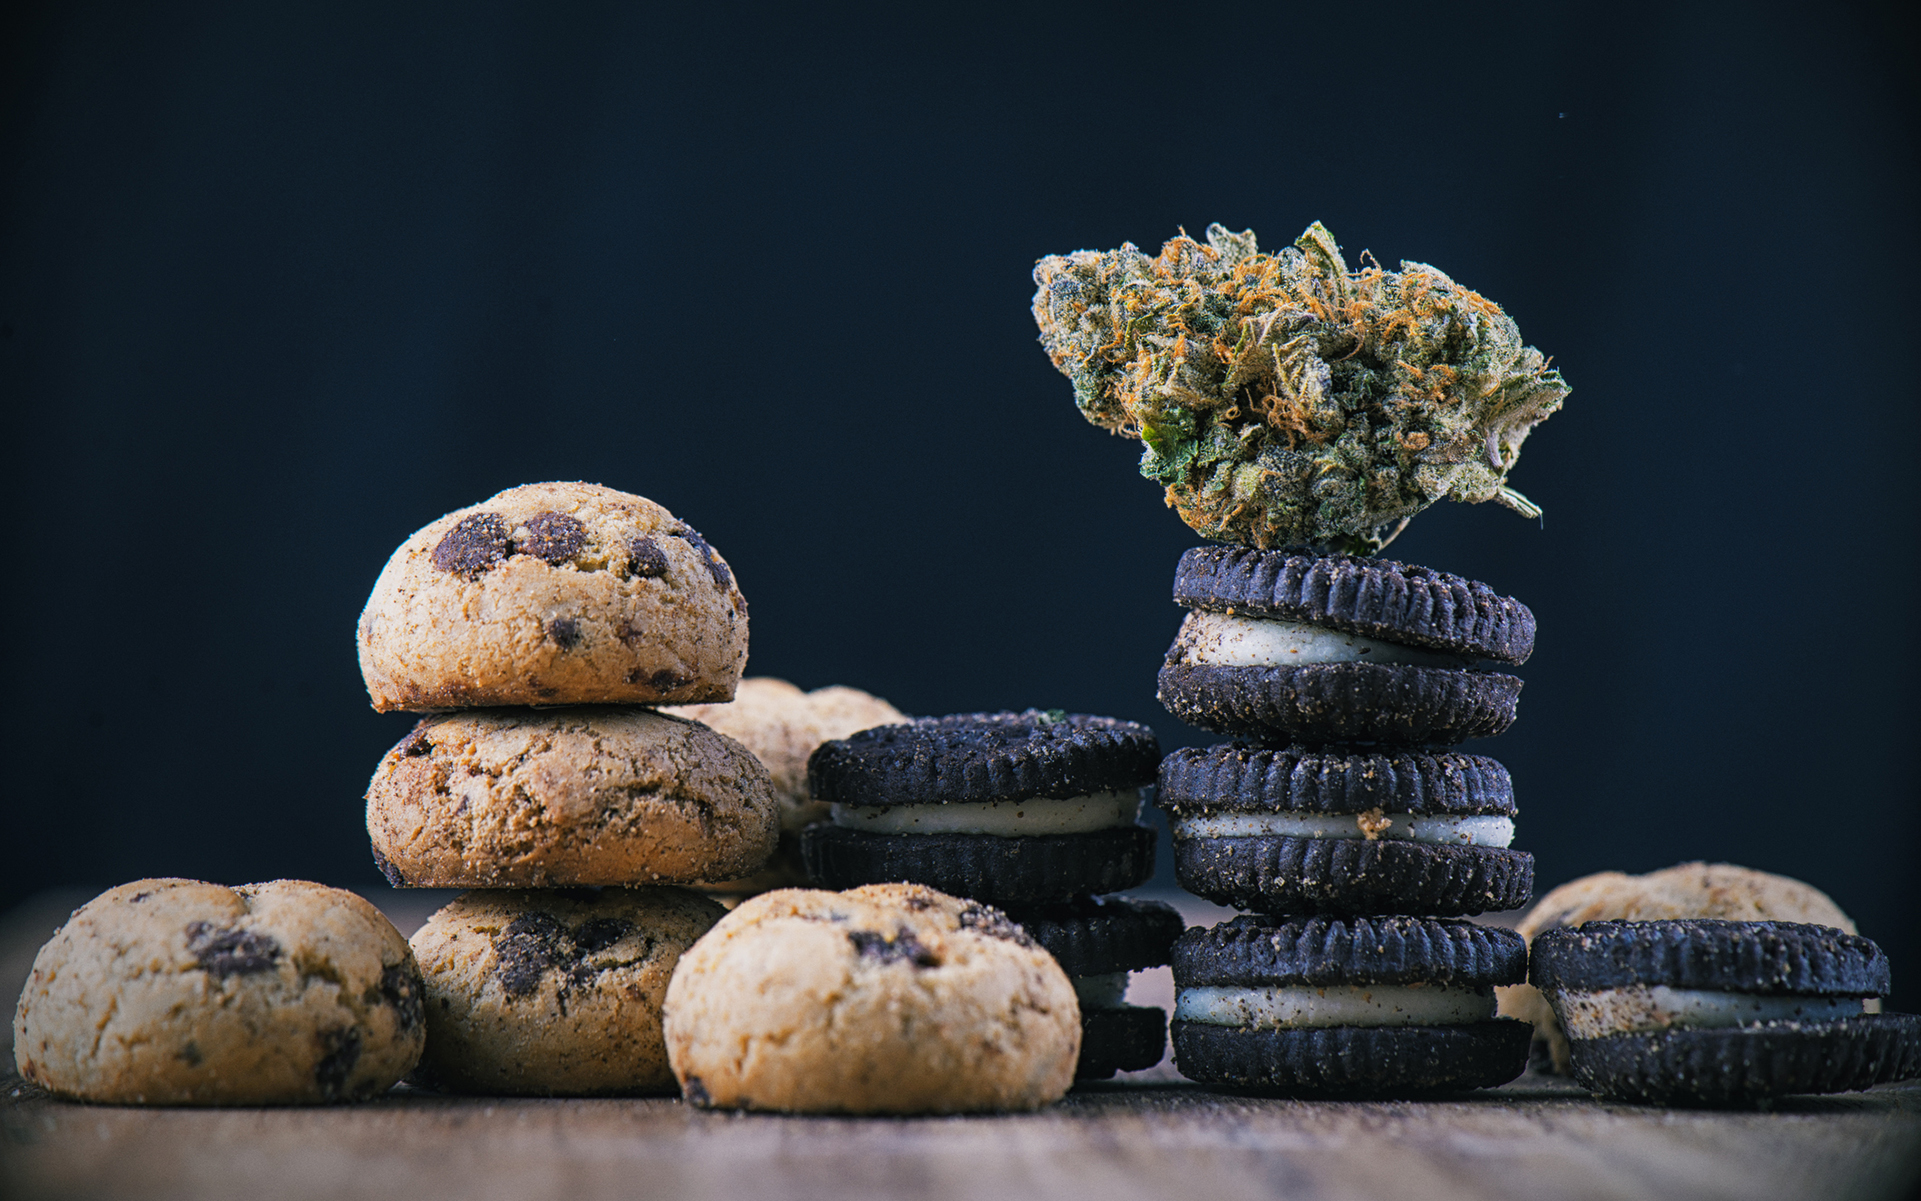 5 Tips To Dose Enjoy High Thc Cannabis Edibles Leafly